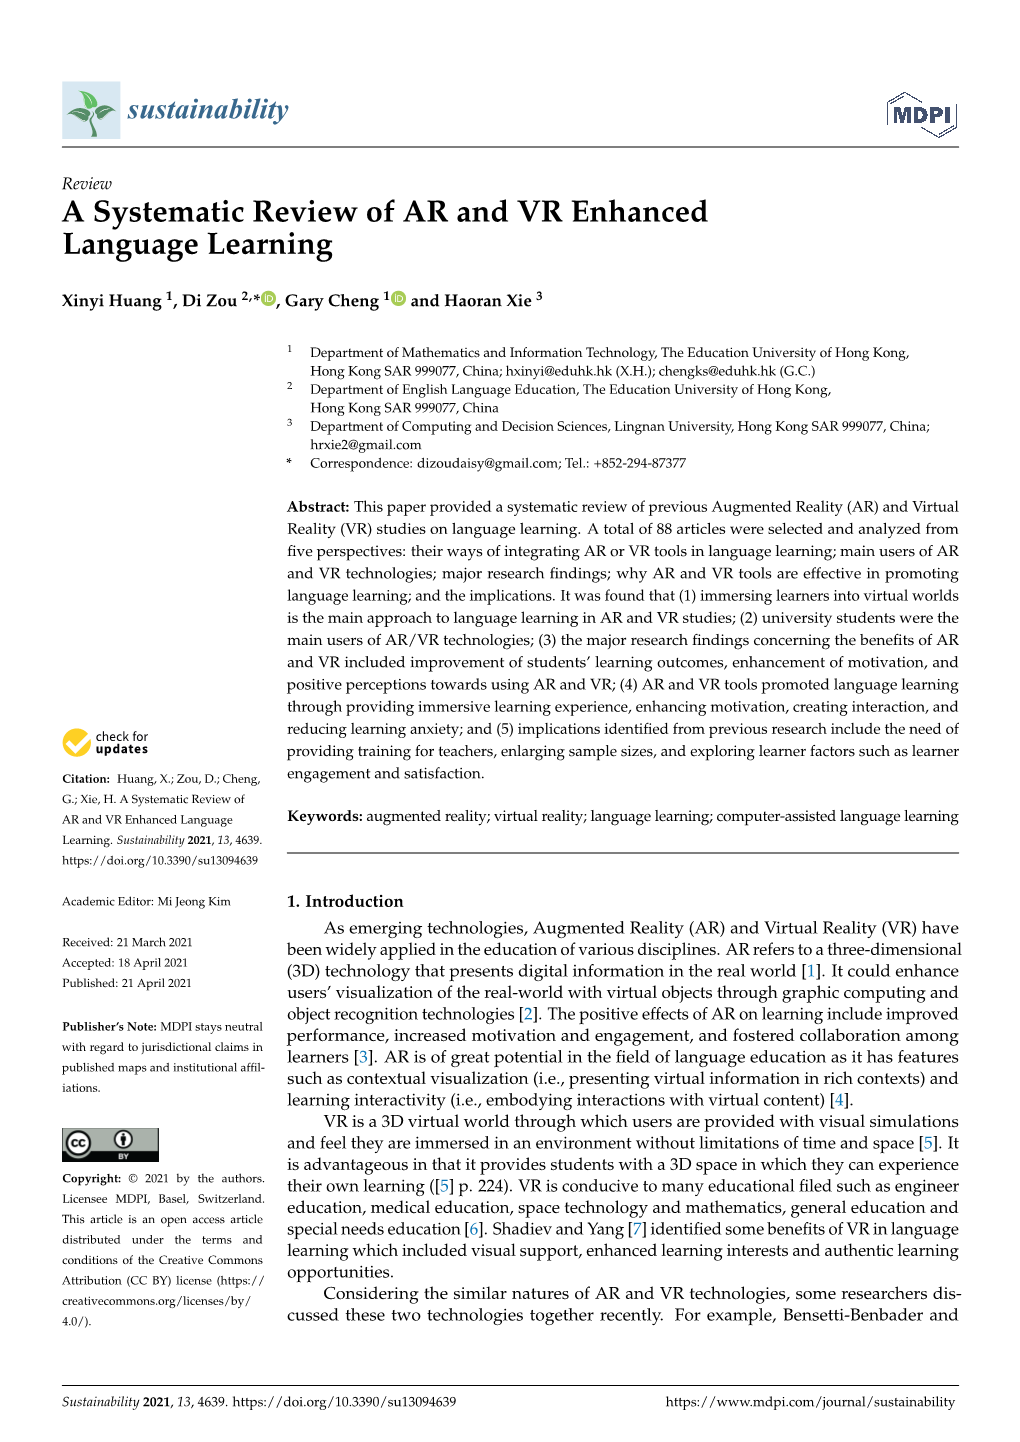 A Systematic Review of AR and VR Enhanced Language Learning